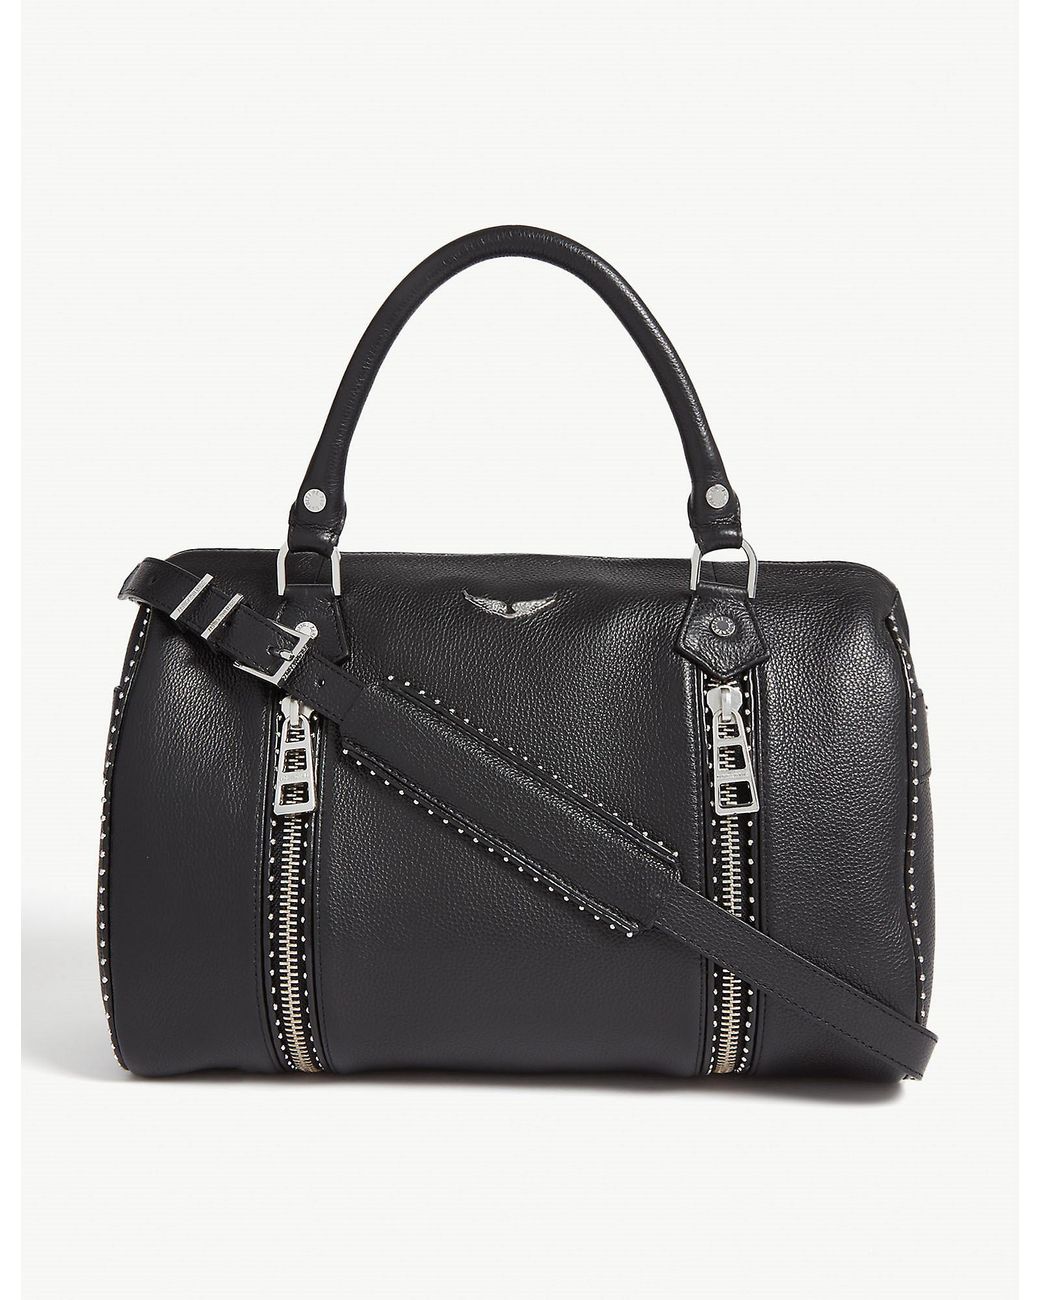 Zadig & Voltaire Sunny Studded Leather Bowling Bag in Black | Lyst